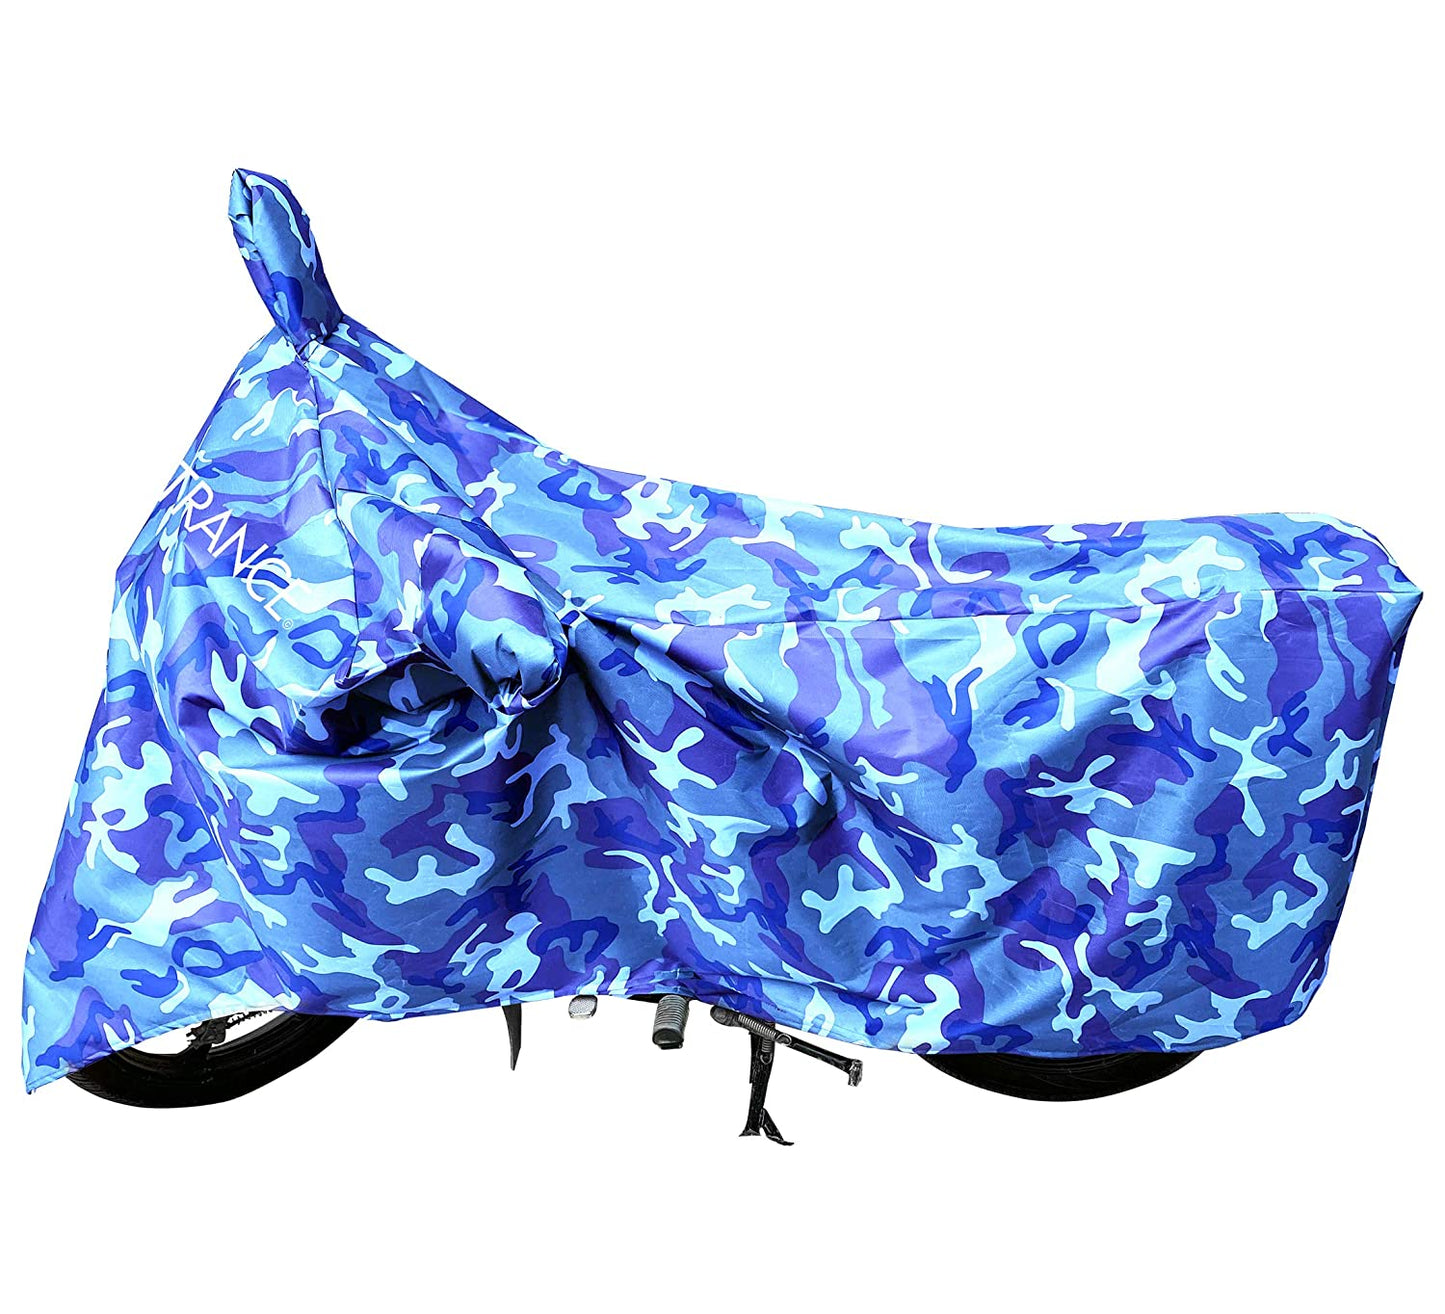 MotoTrance Jungle Bike Body Covers For Honda Dio - Interlock-Stitched Waterproof and Heat Resistant with Mirror Pockets